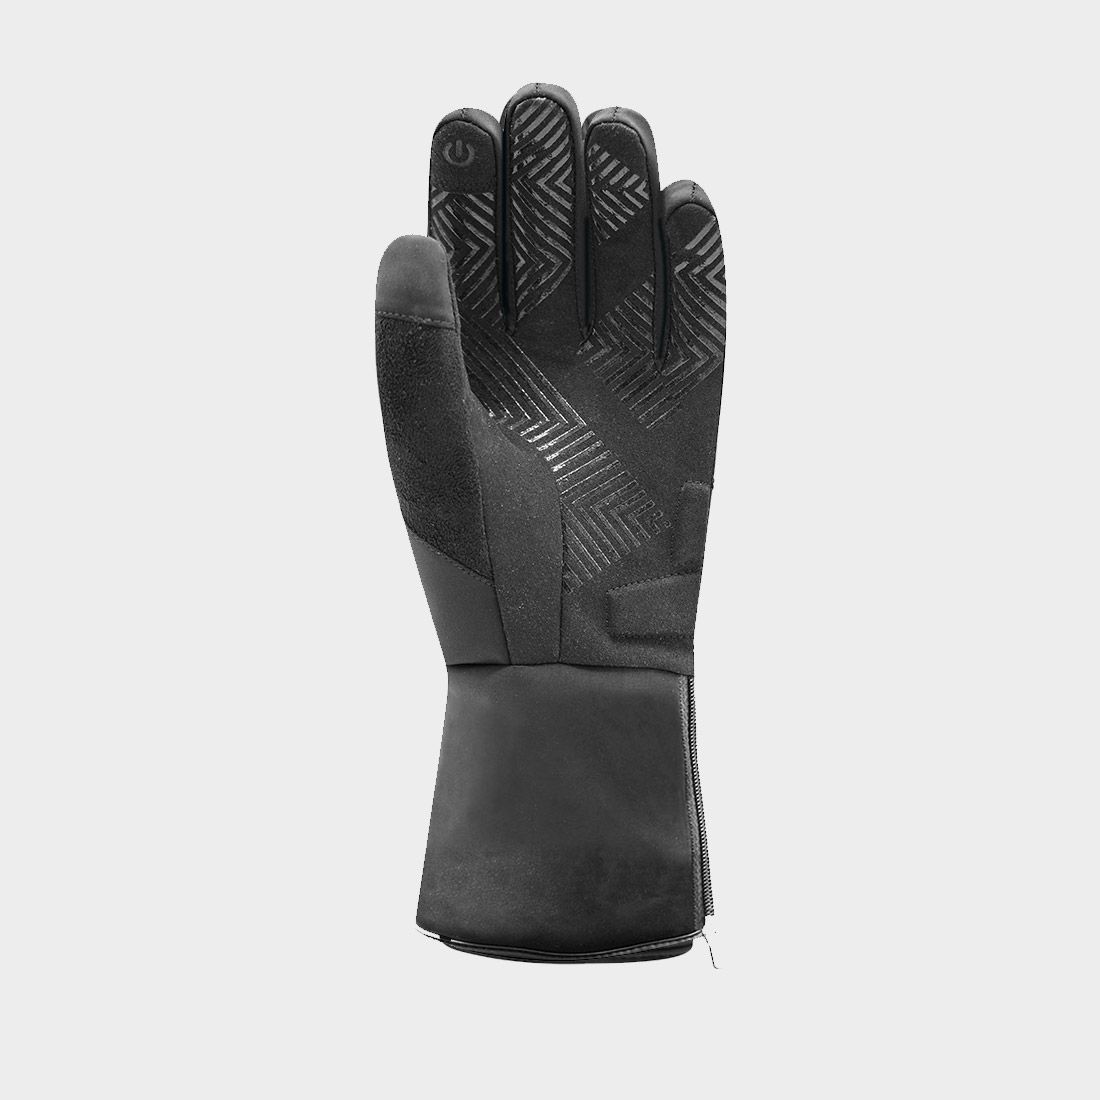 EGLOVE 4 - Heated cycling gloves